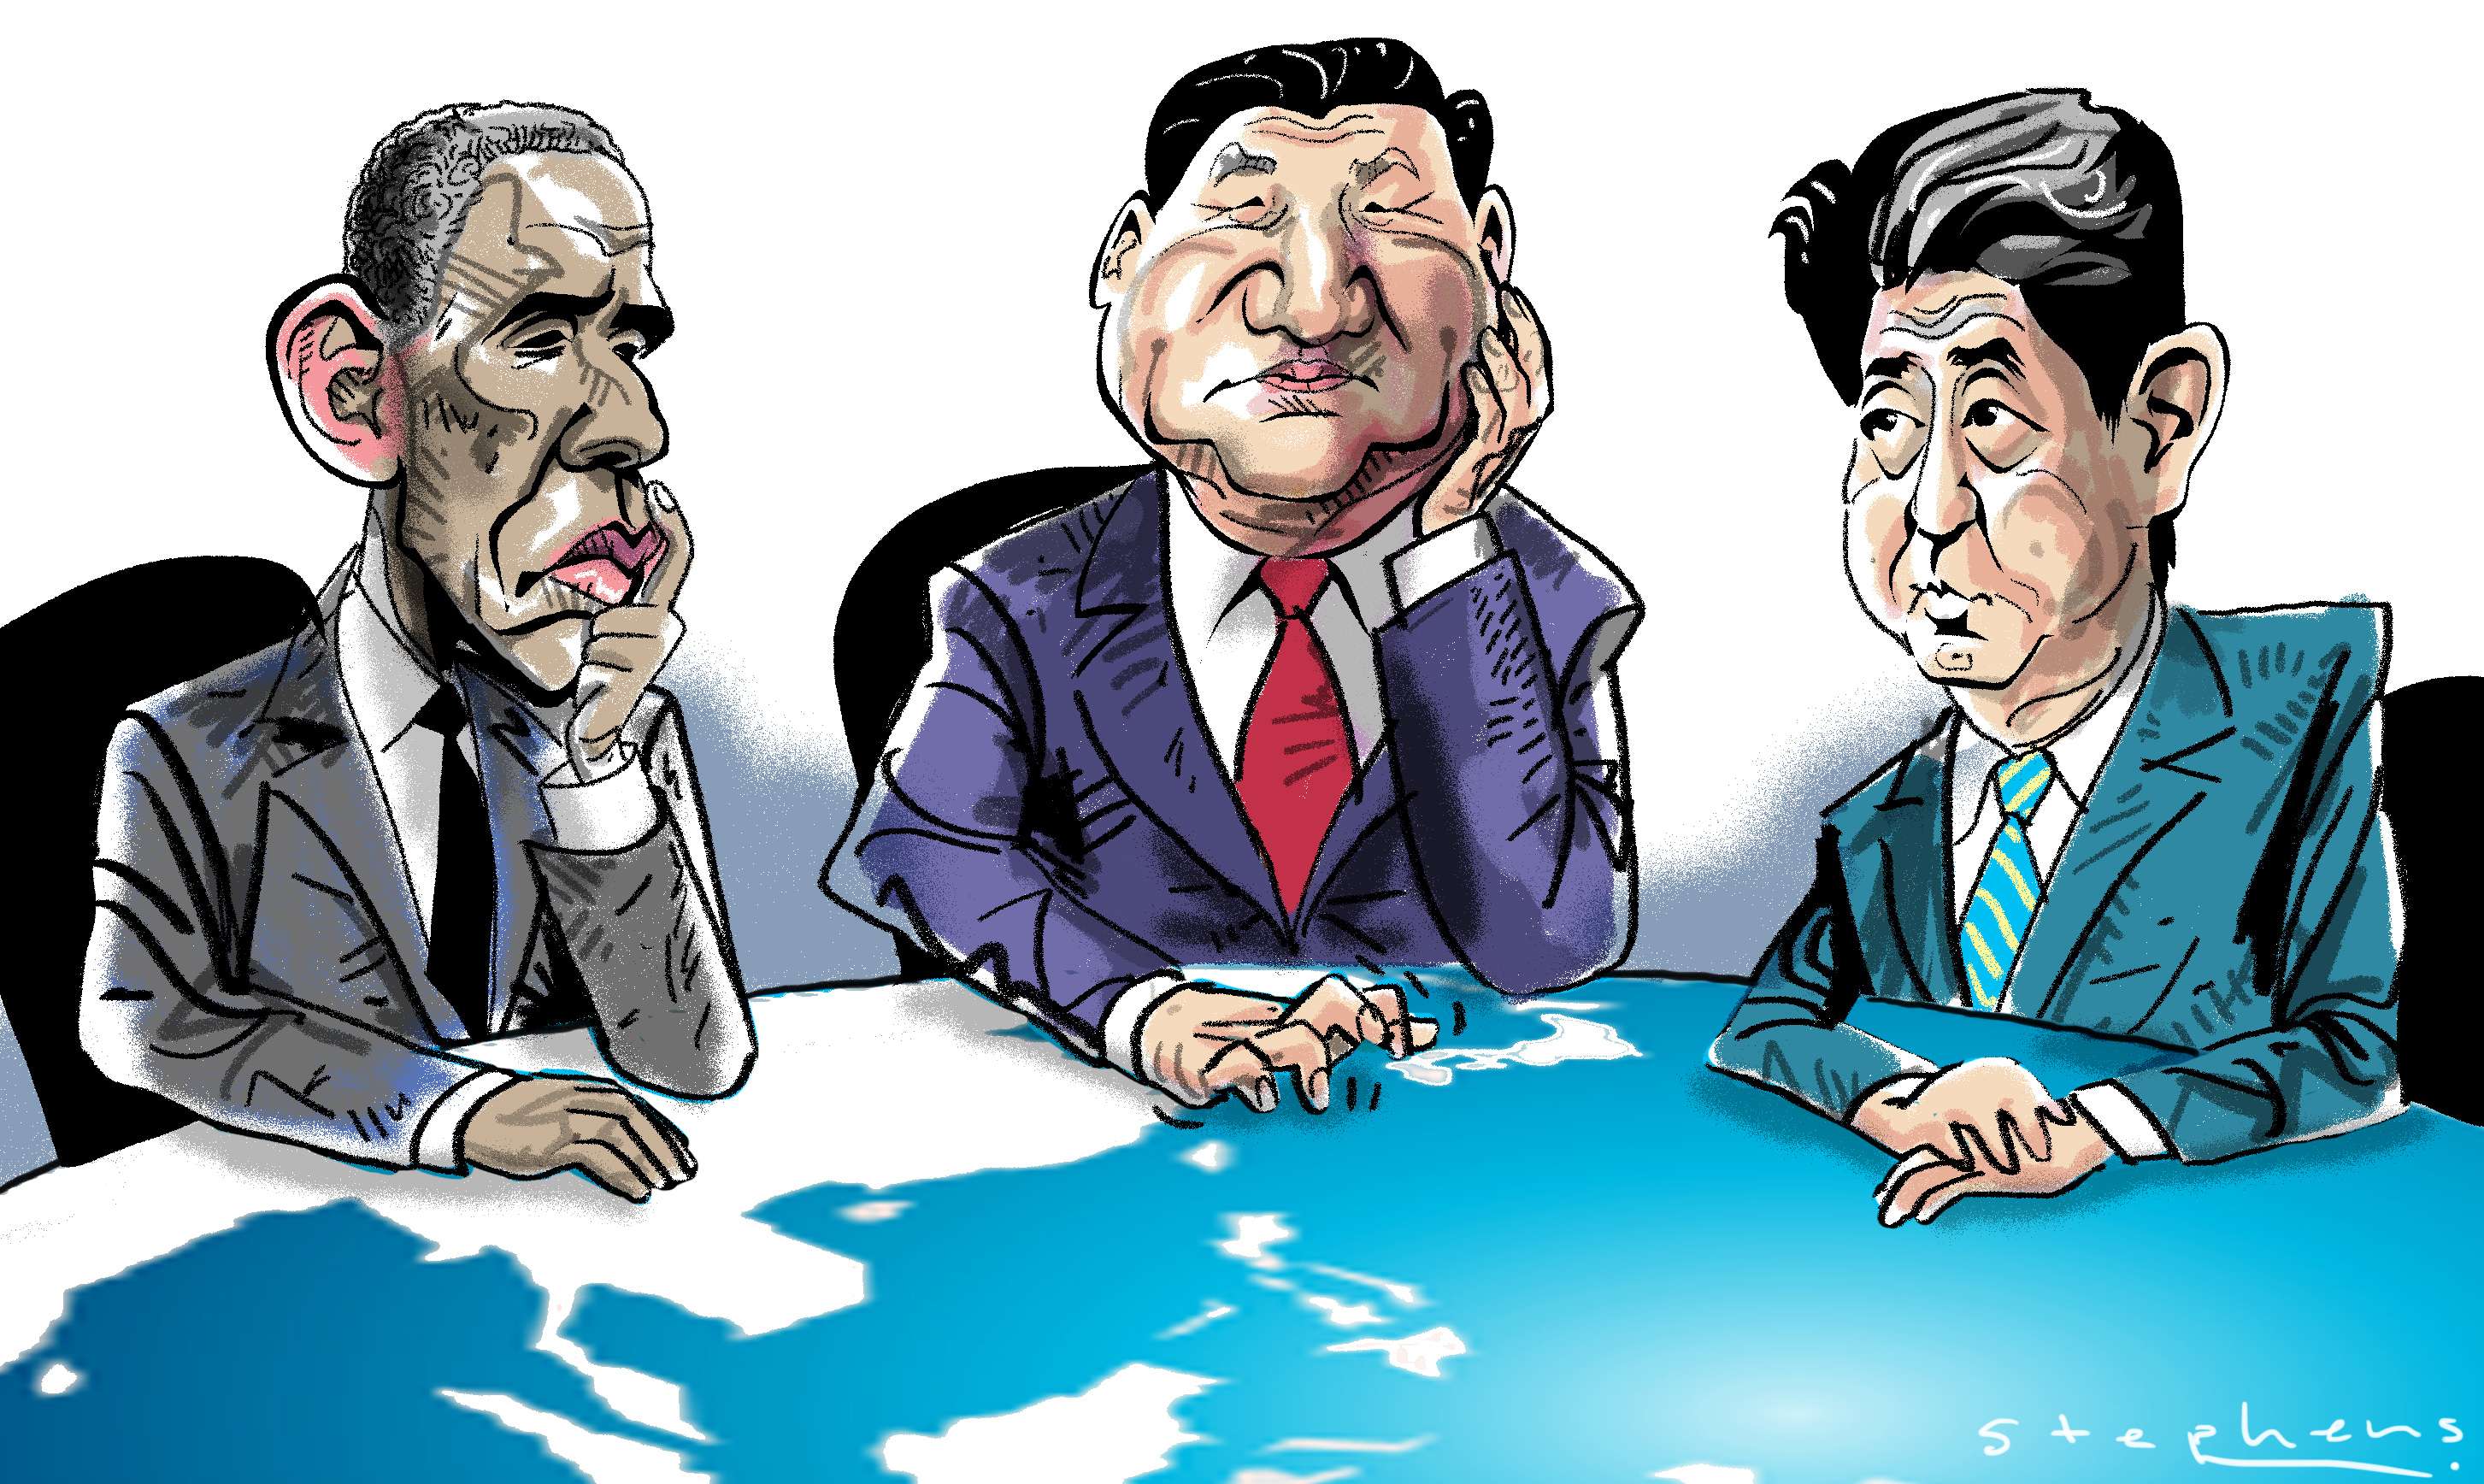 Jonathan D. Pollack says the Chinese president will be hard-pressed to maintain an economic focus, especially on the summit sidelines, amid growing political rivalry in the region and a sharp paradox in Sino-US relations